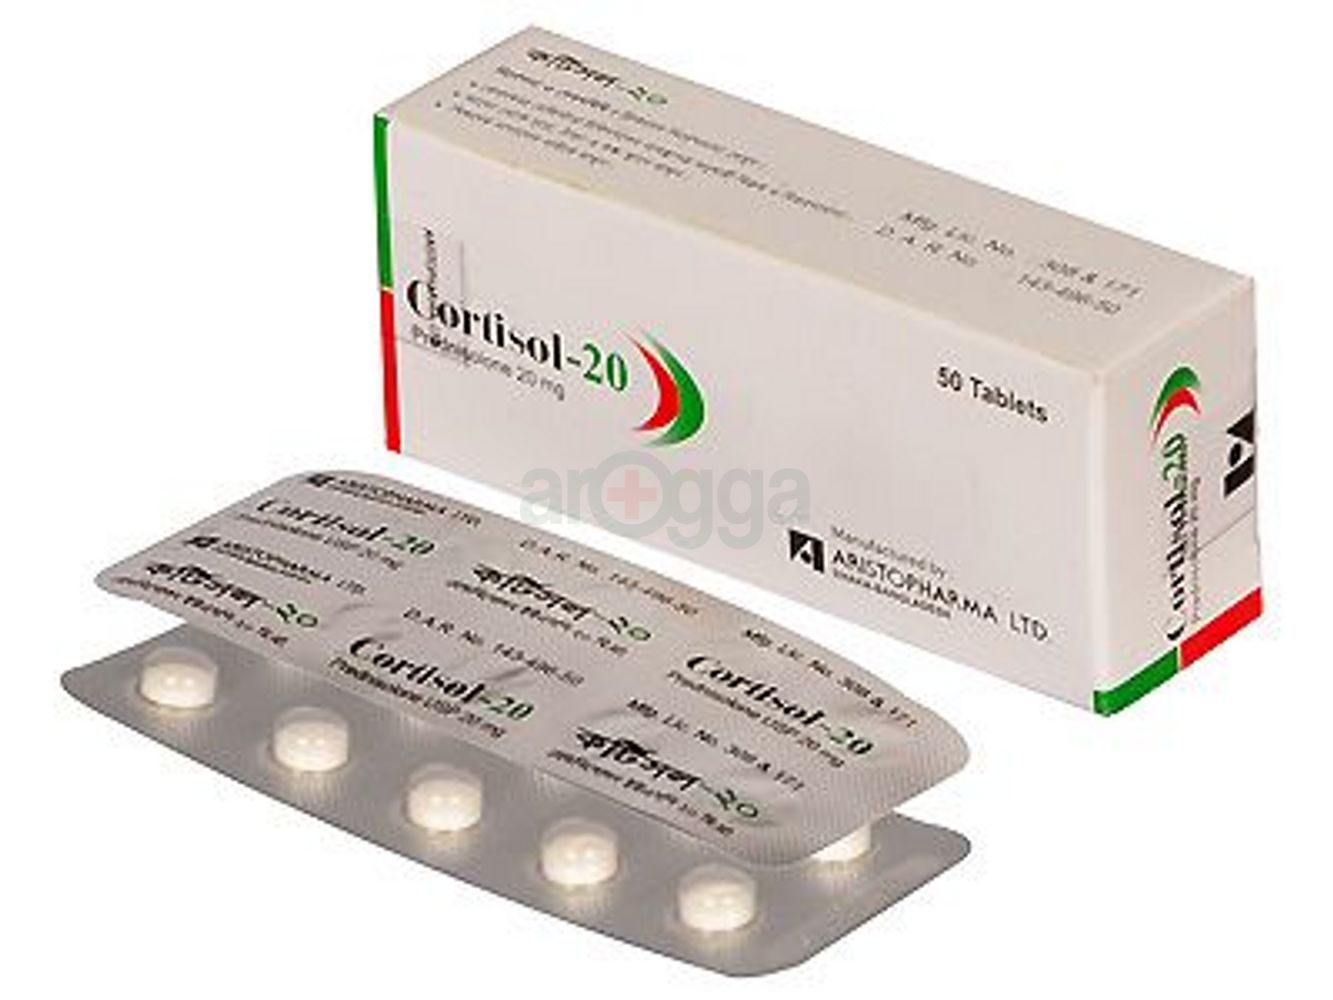 Cortisol 20